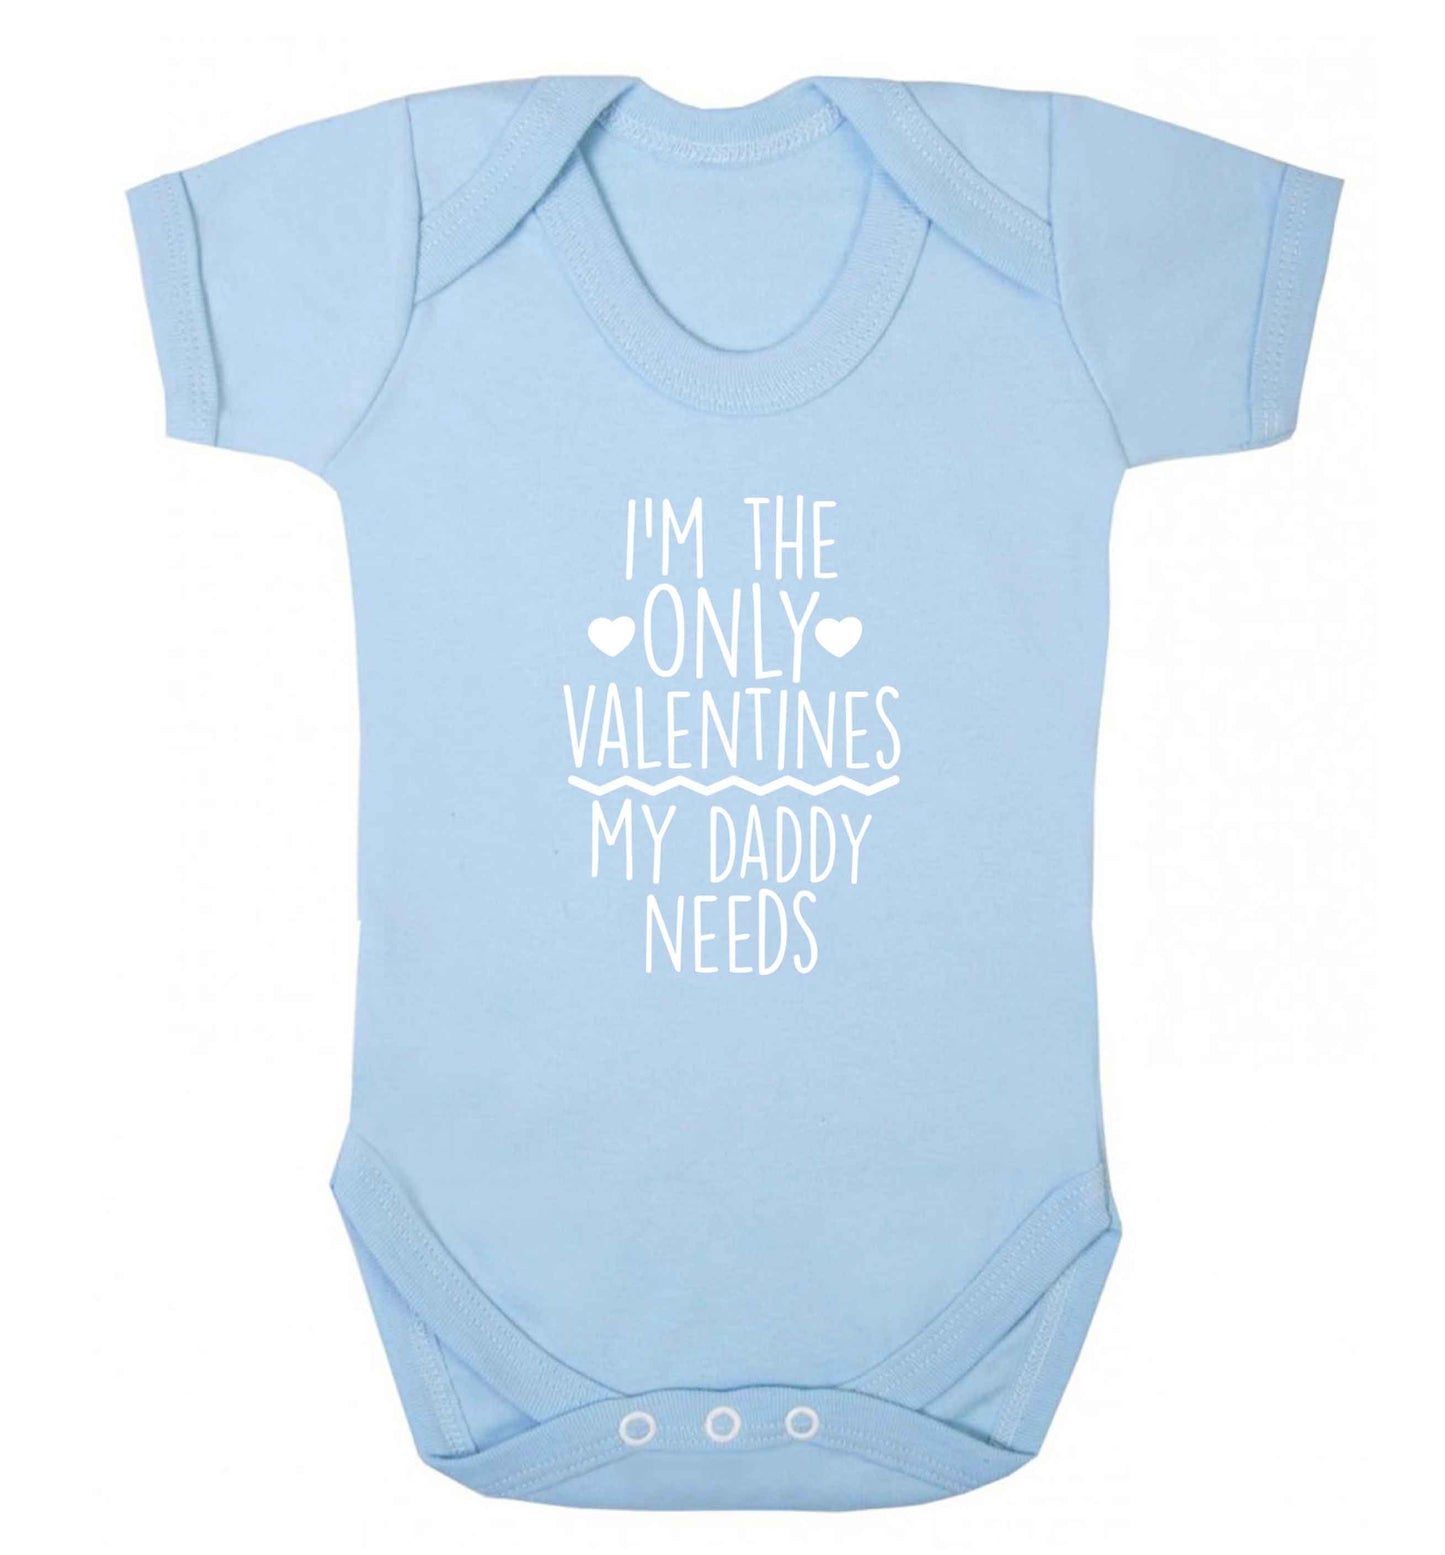 I'm the only valentines my daddy needs baby vest pale blue 18-24 months